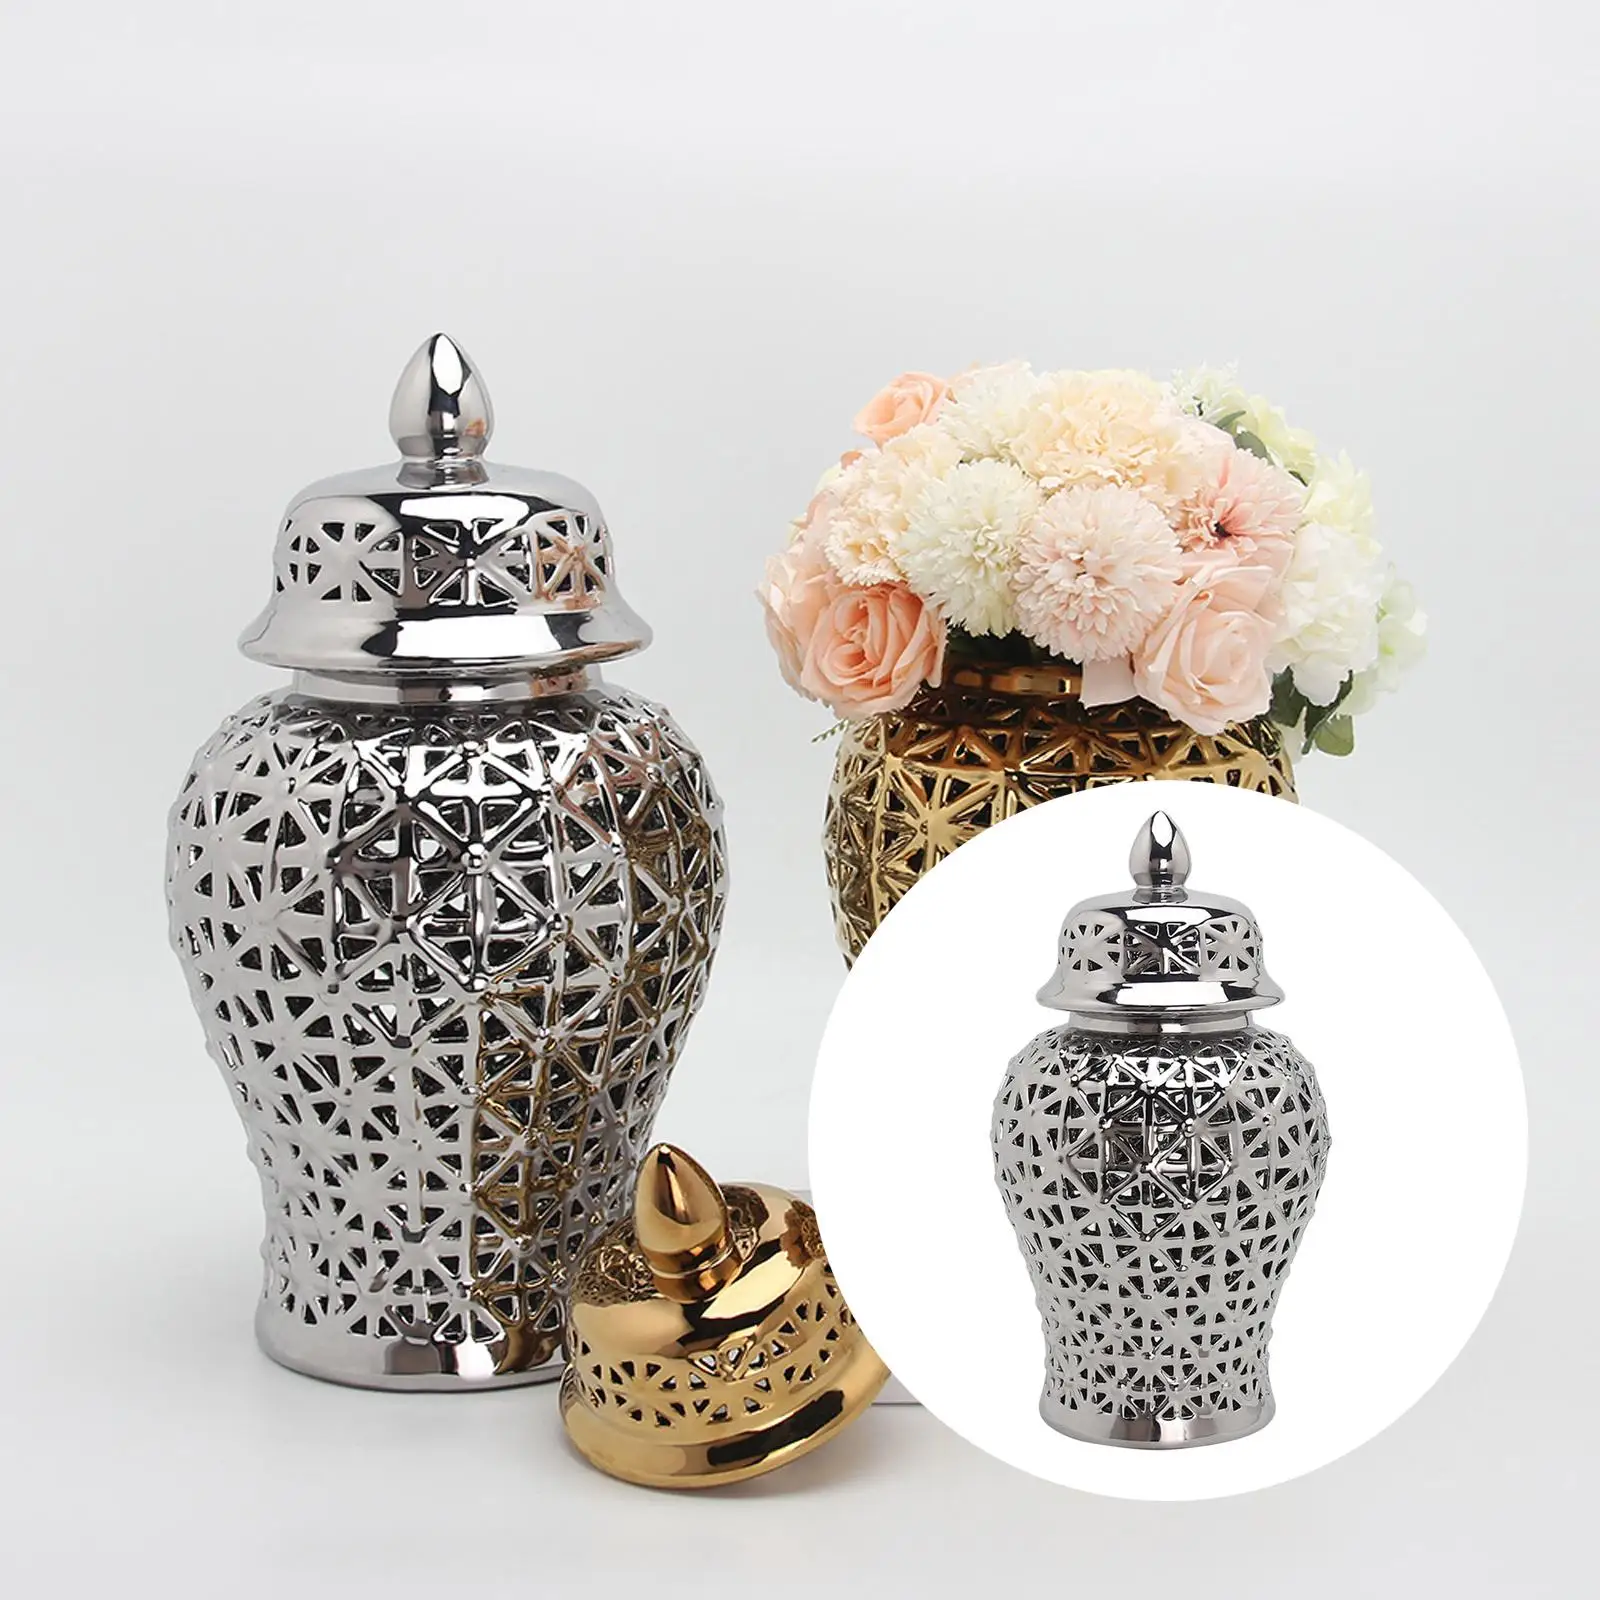 Traditional Ceramic Ginger Jar with Lid for Countertop Table Decoration